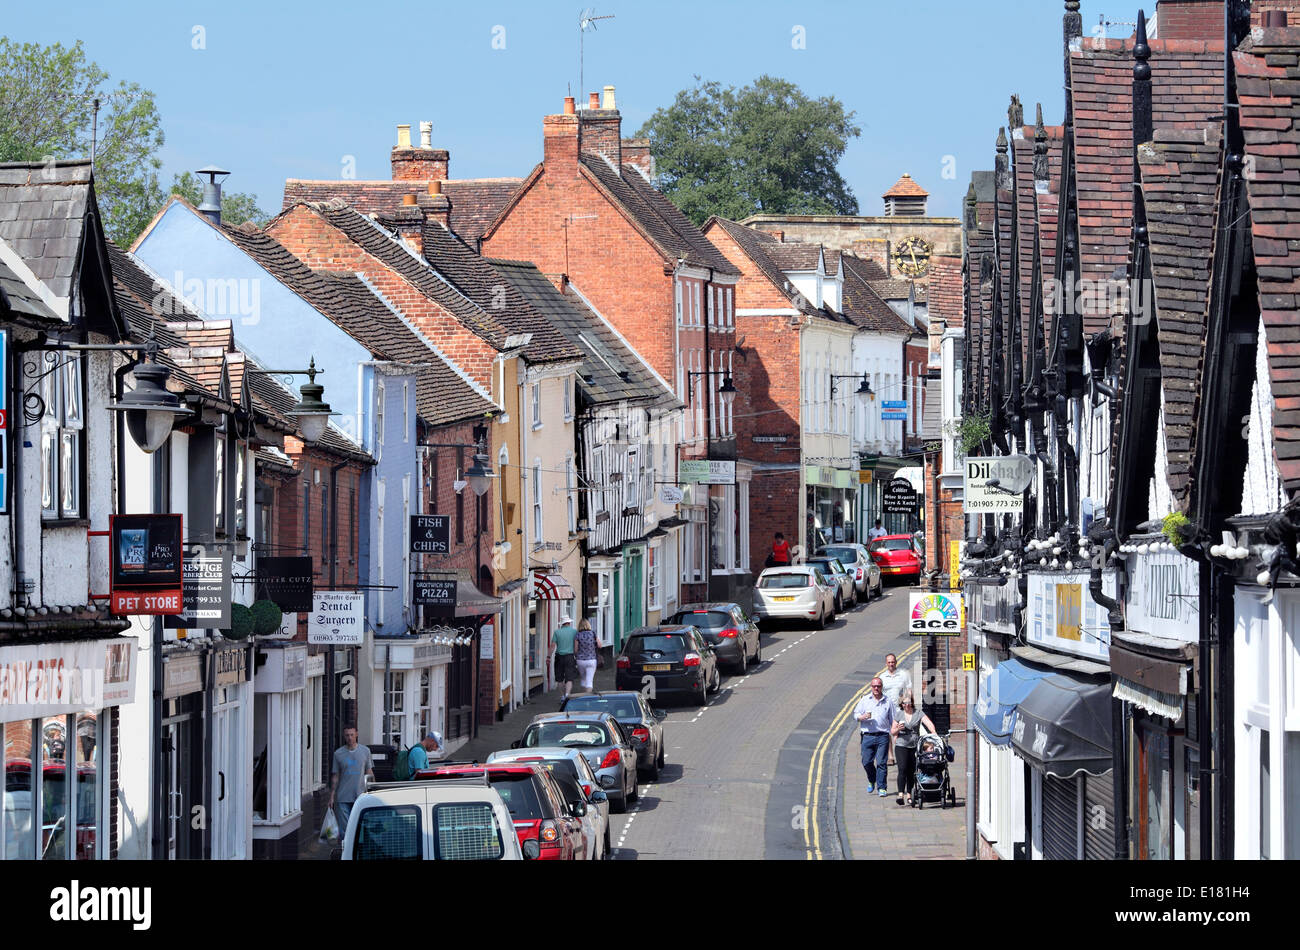 Die High Street, Droitwich Spa, Worcestershire. Stockfoto